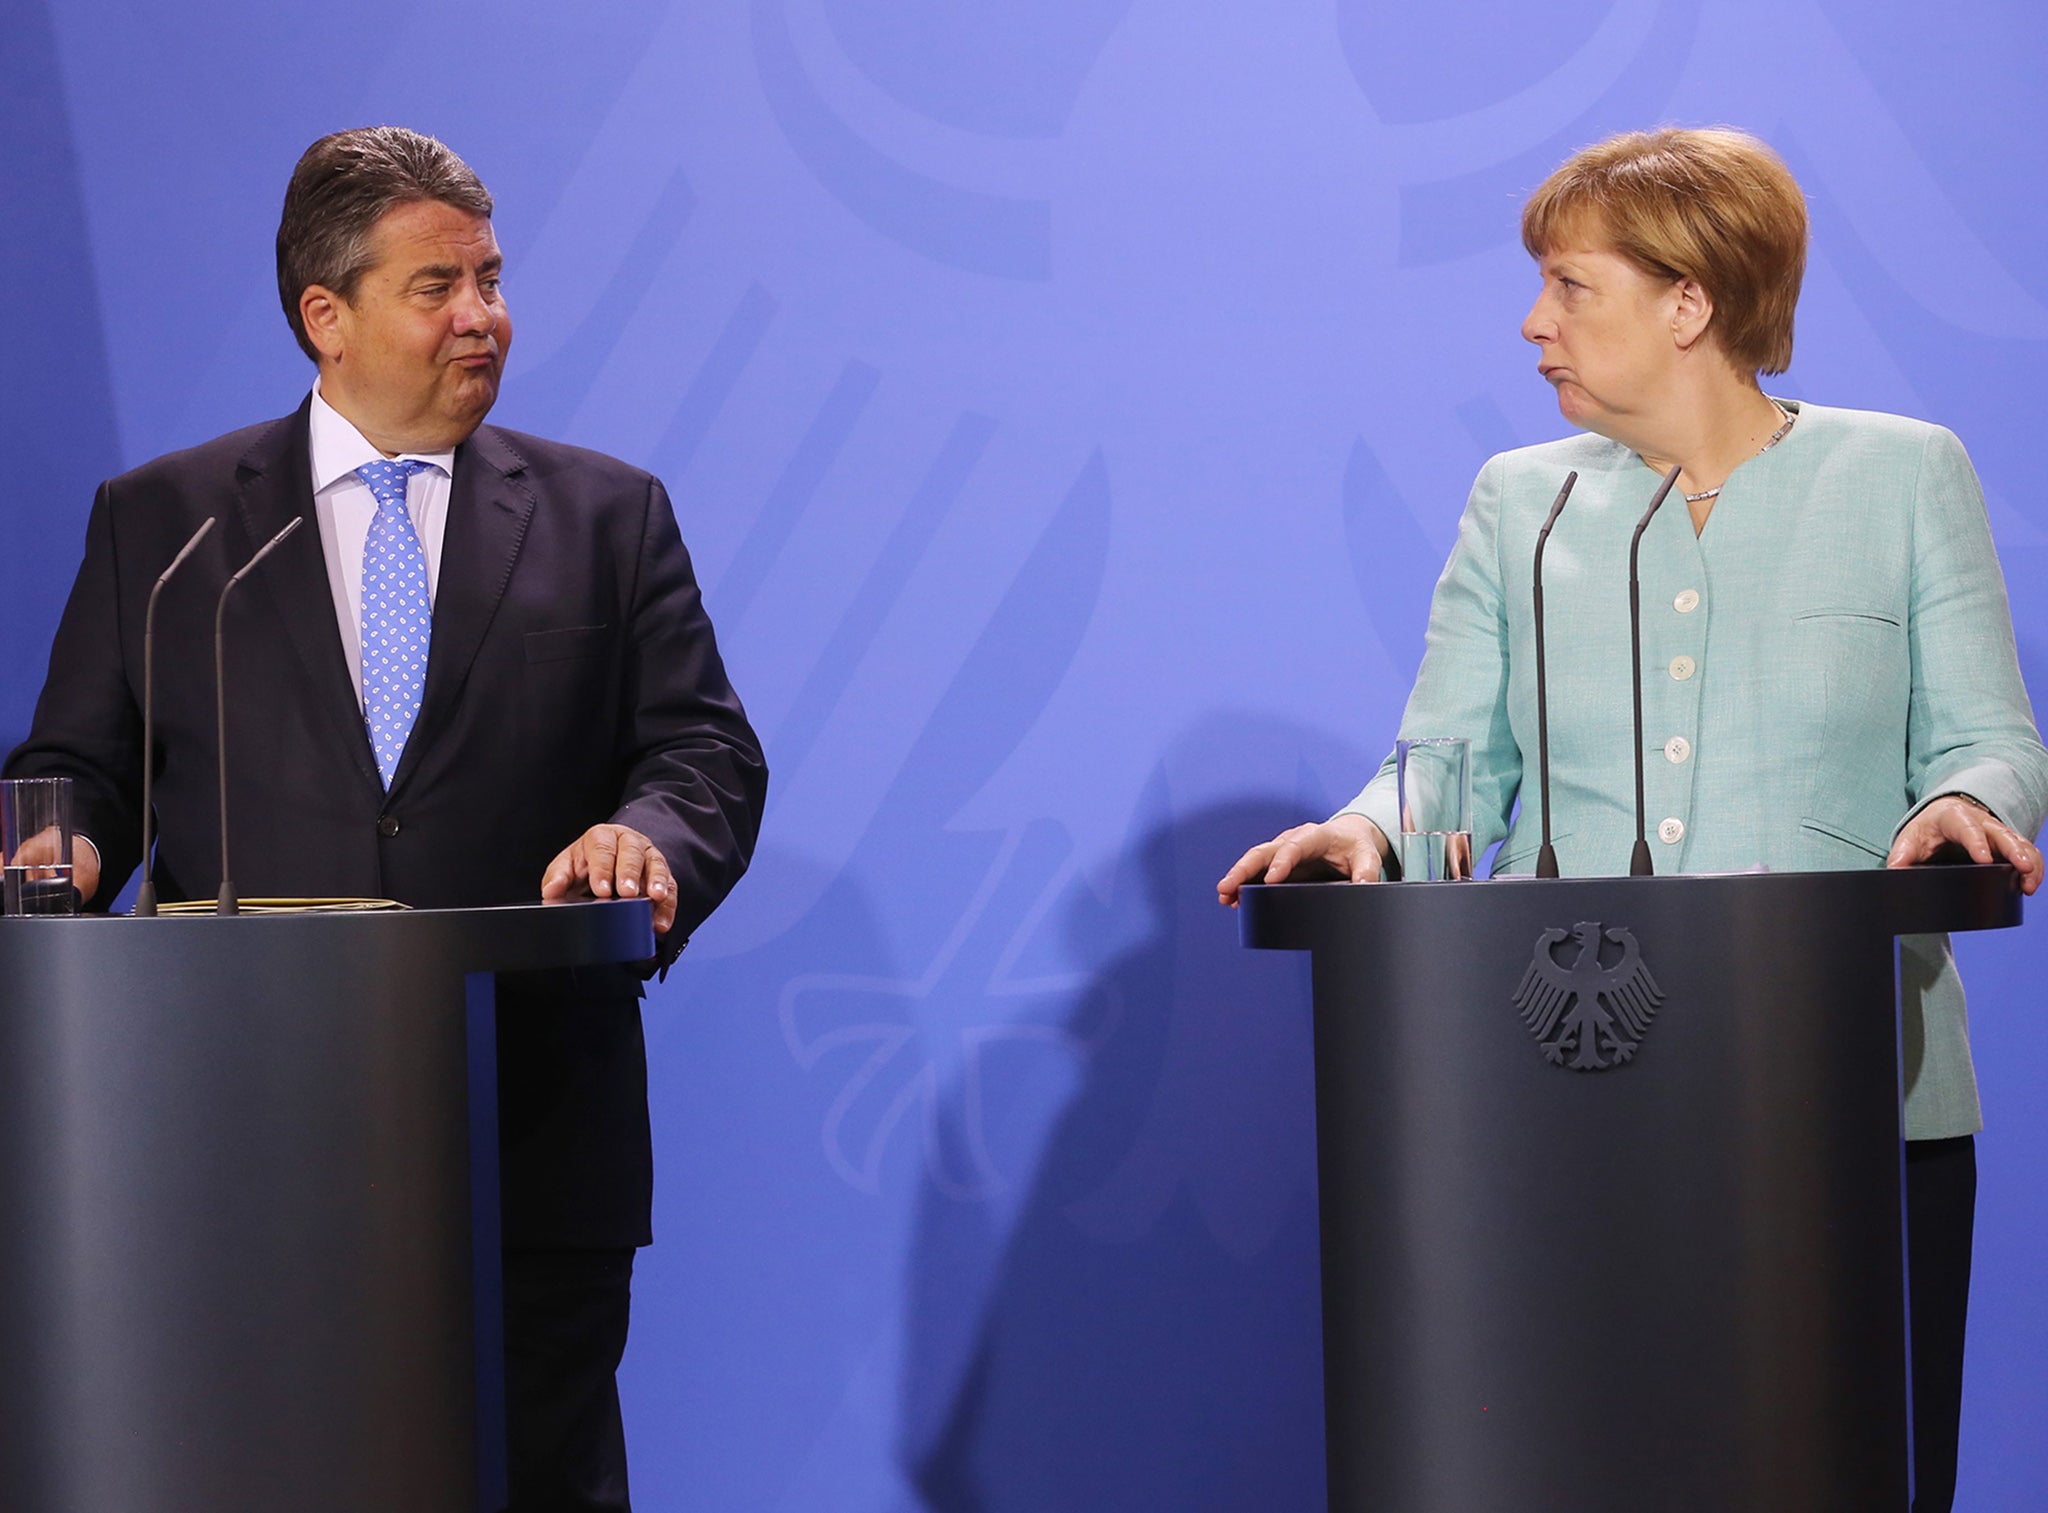 German Vice Chancellor Sigmar Gabriel has warned the country could be in for a "rough ride" under President Donald Trump - but Chancellor Angela Merkel has expressed a more optimistic view